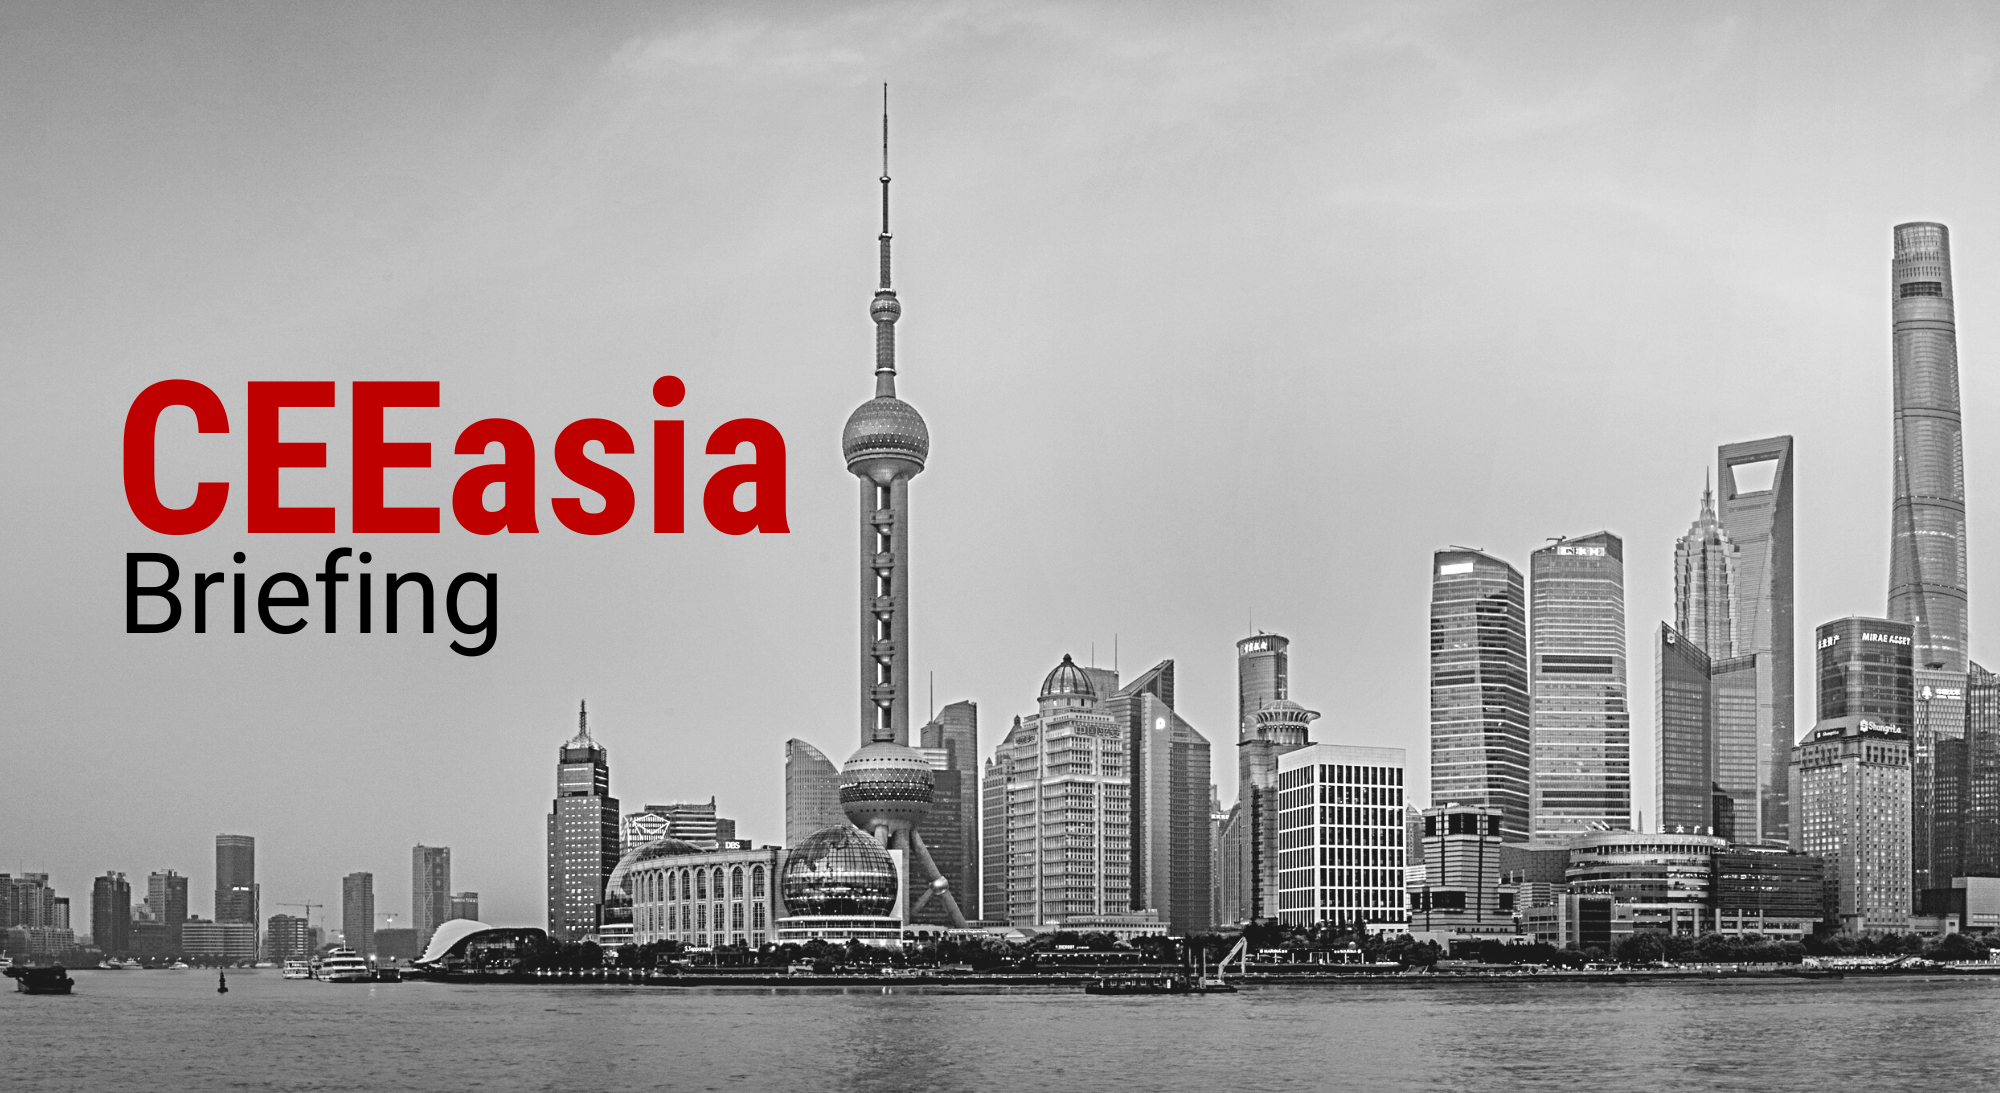 CEEasia Briefing #28: Taiwan, China & the CEE, Japan’s role in the Ukraine war, India’s balancing approach towards Russia